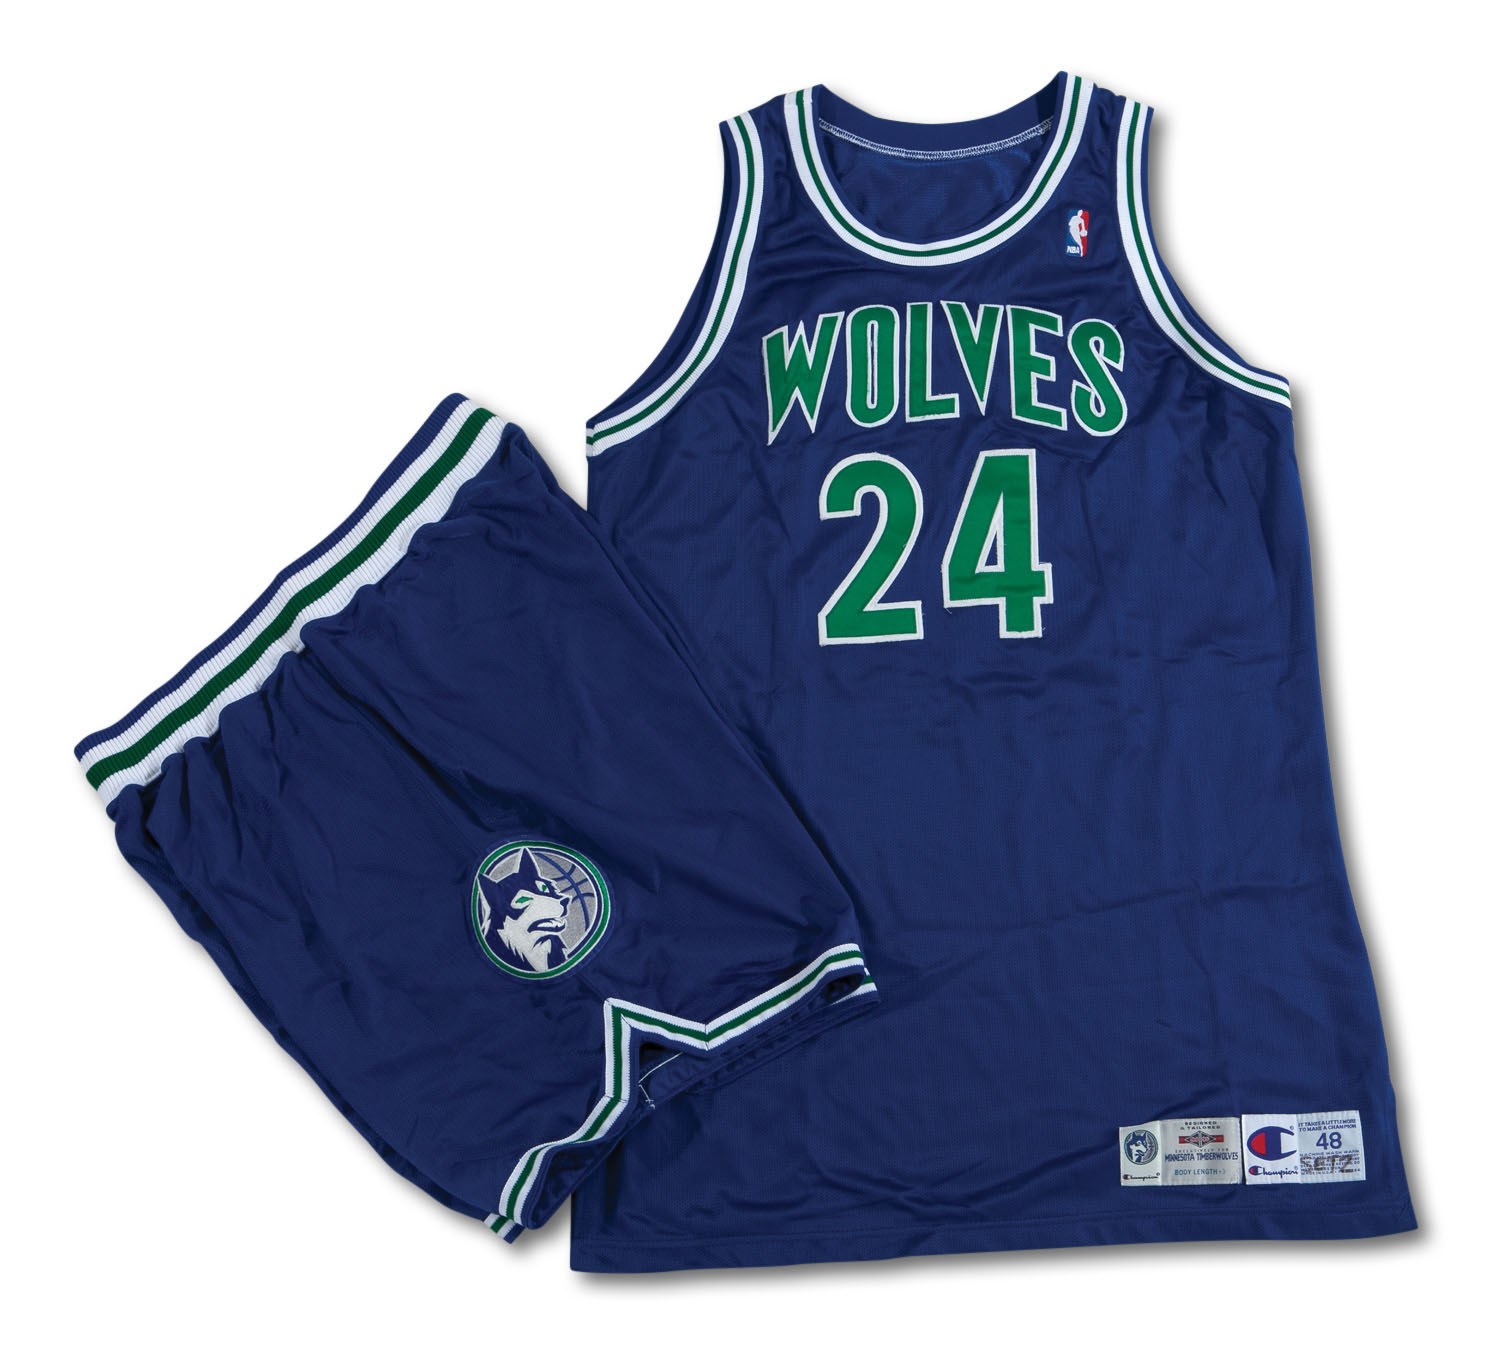 GOOGS Tom Gugliotta Authentic Minnesota Timberwolves Jersey Size